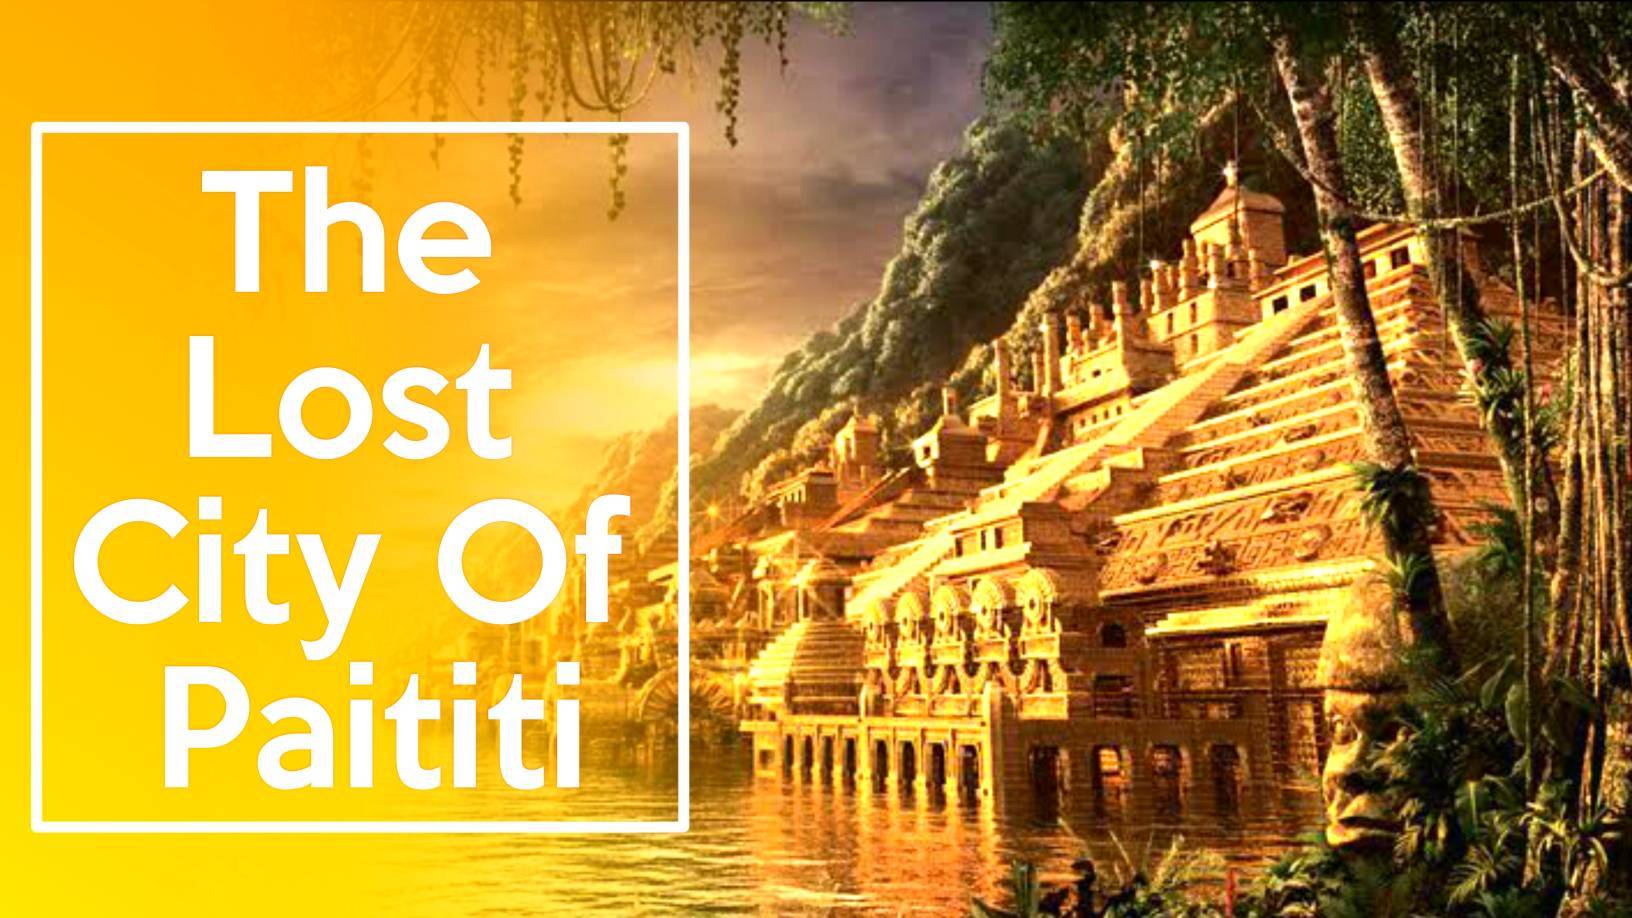 City of gold: The lost city of Paititi may be the most lucrative historical find 2